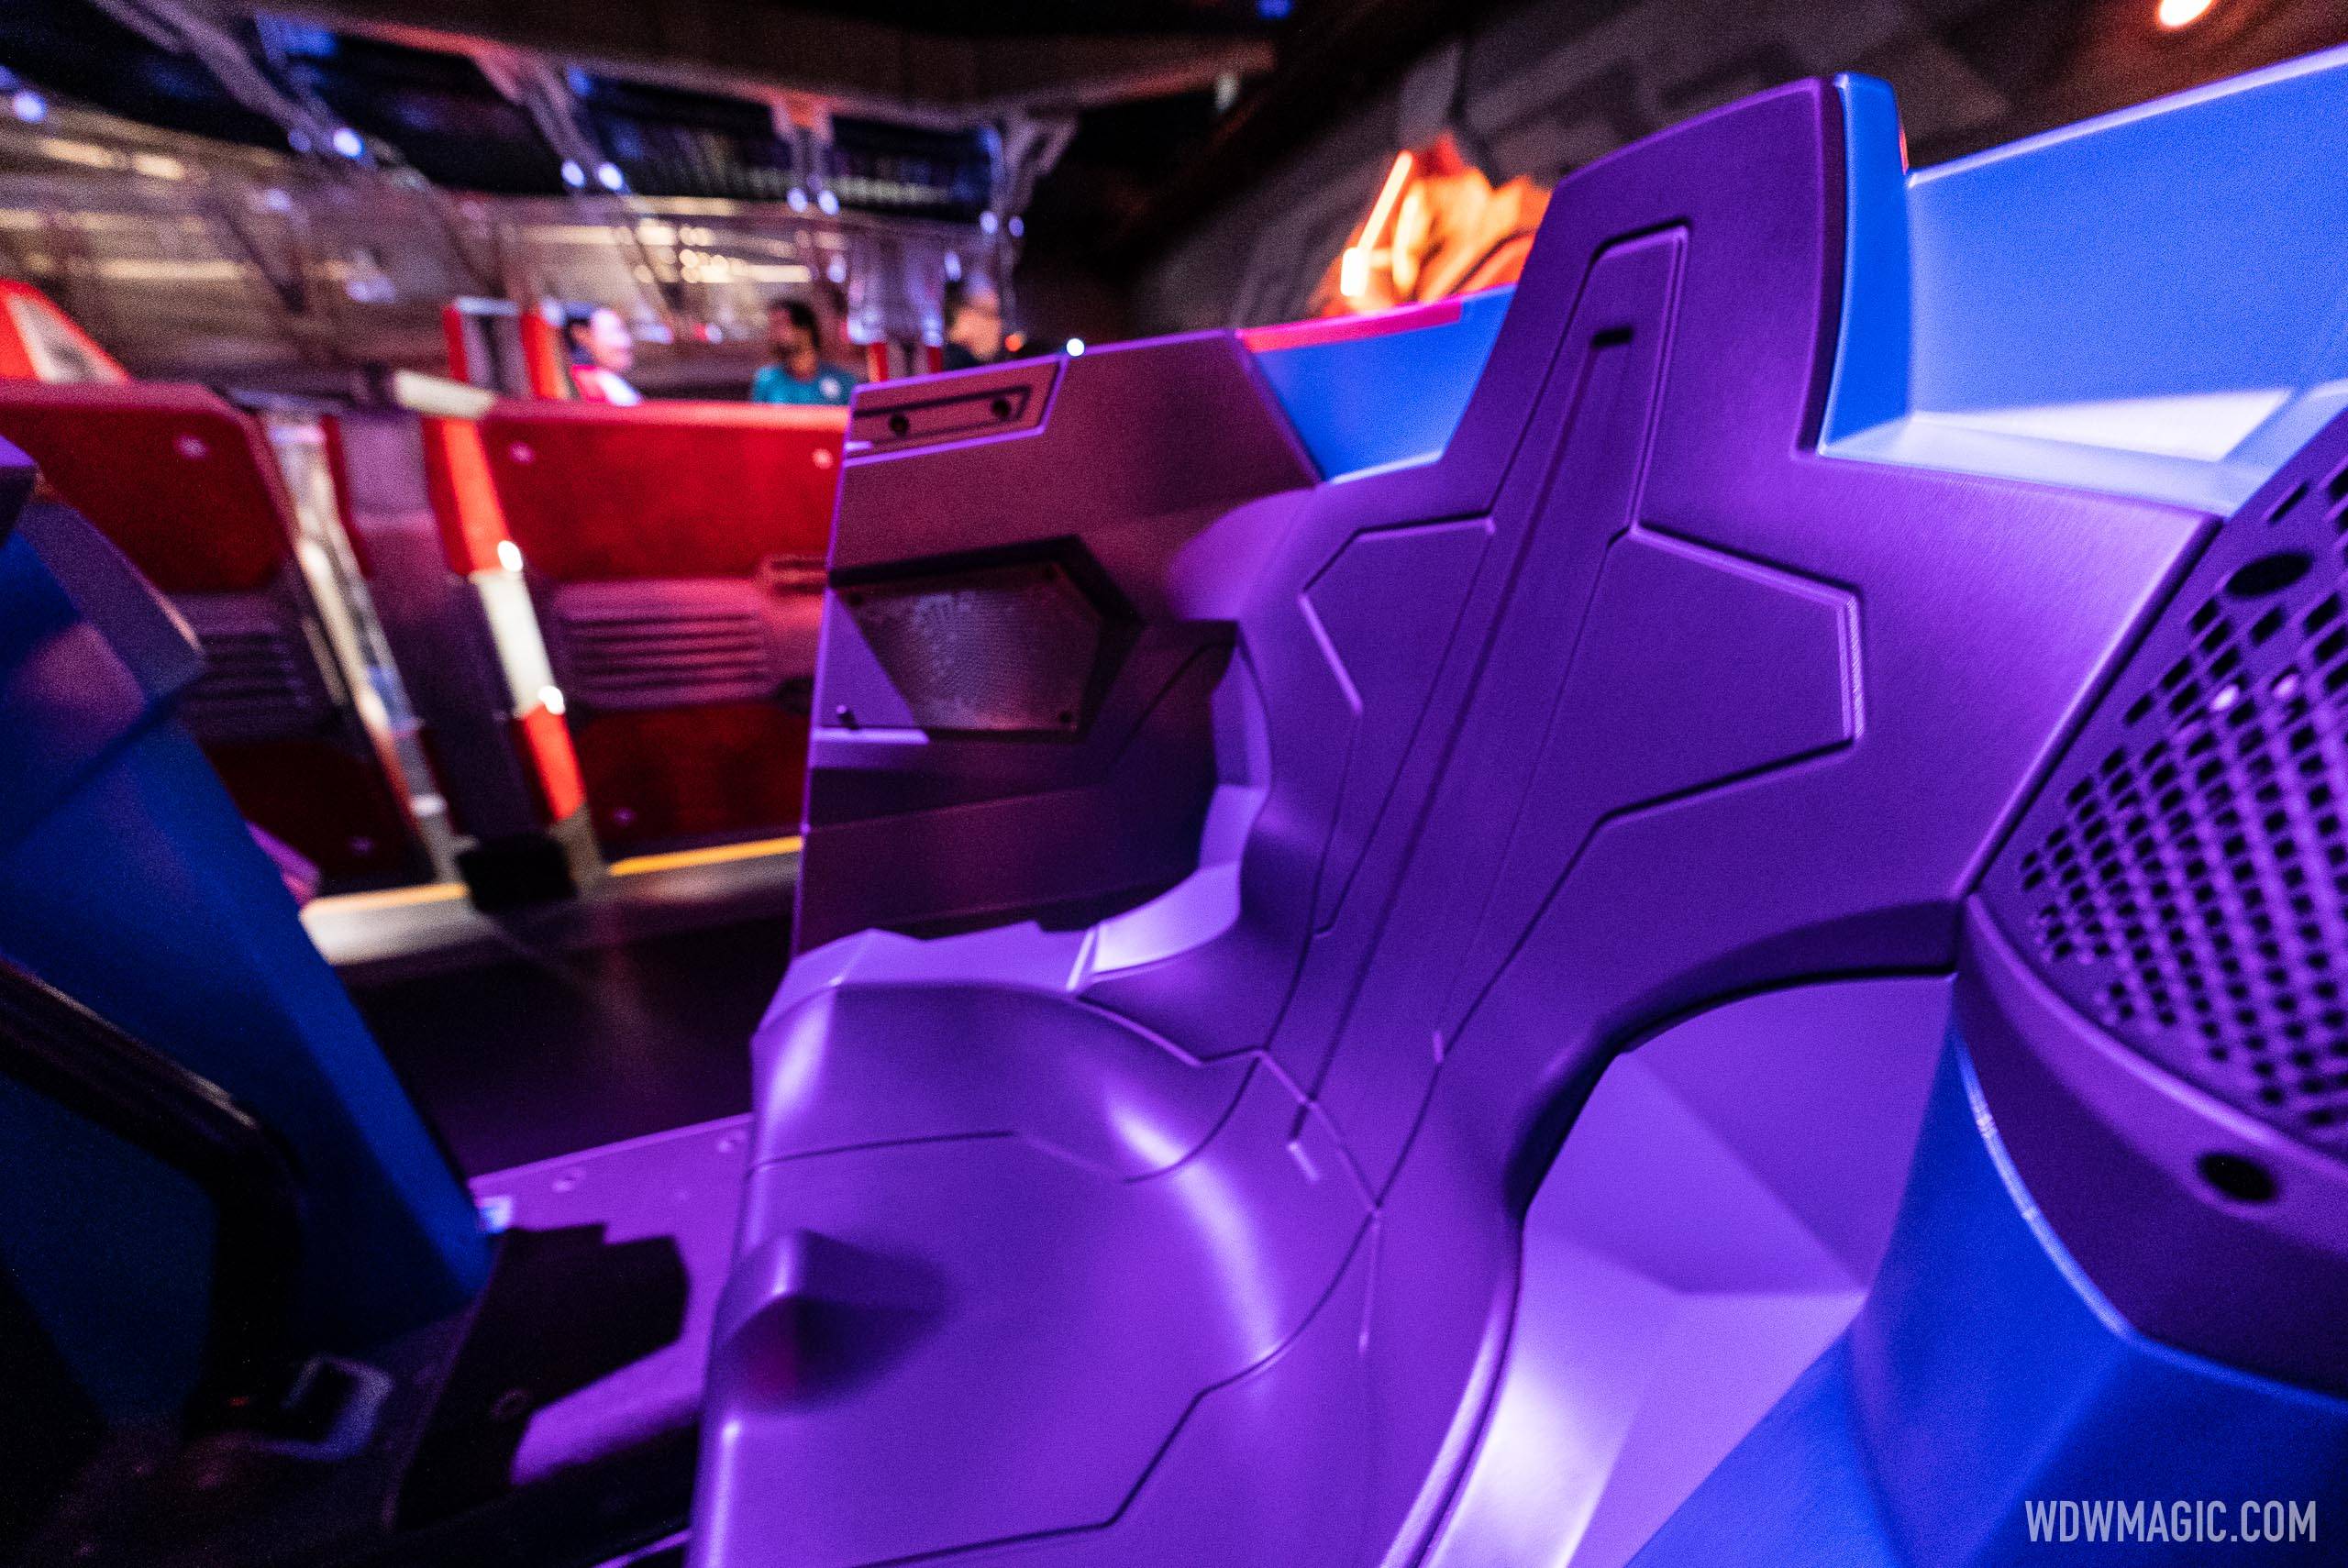 Large comfortable seats on the Cosmic Rewind ride vehicle